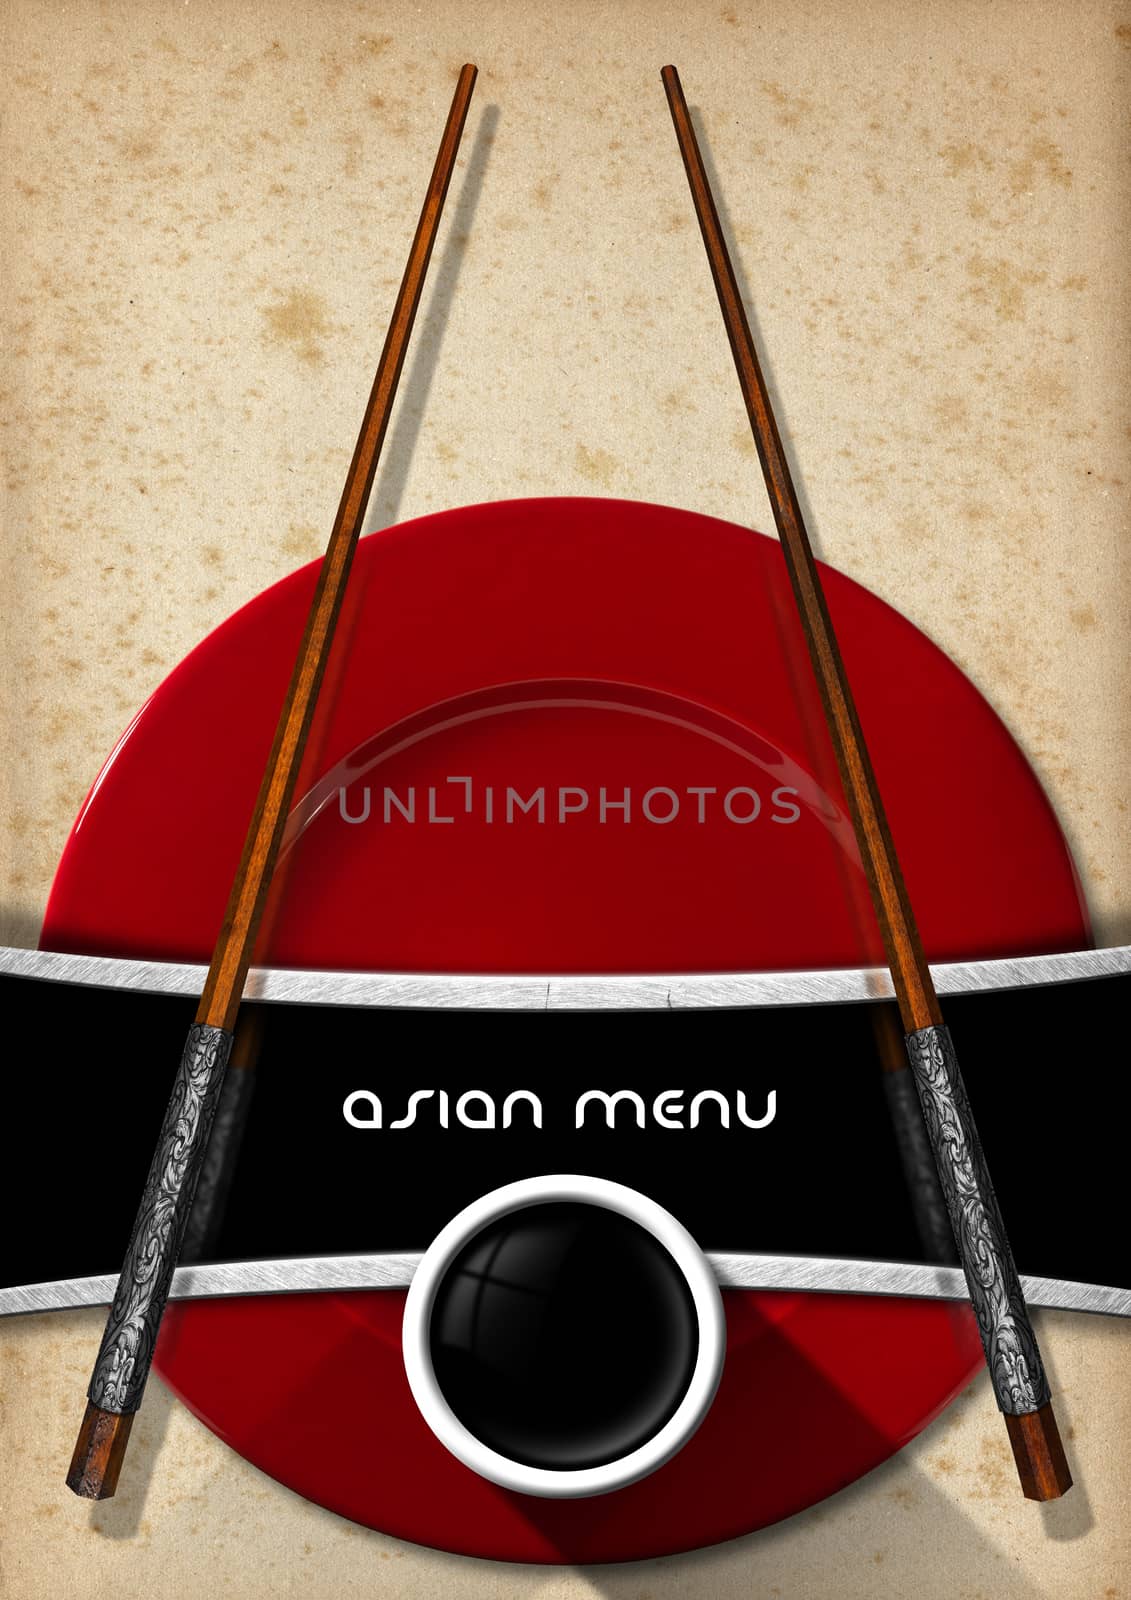 Template for an Asian menu with wooden and silver chopsticks, red plate and a bowl of sauce. On a yellowed old spotted paper